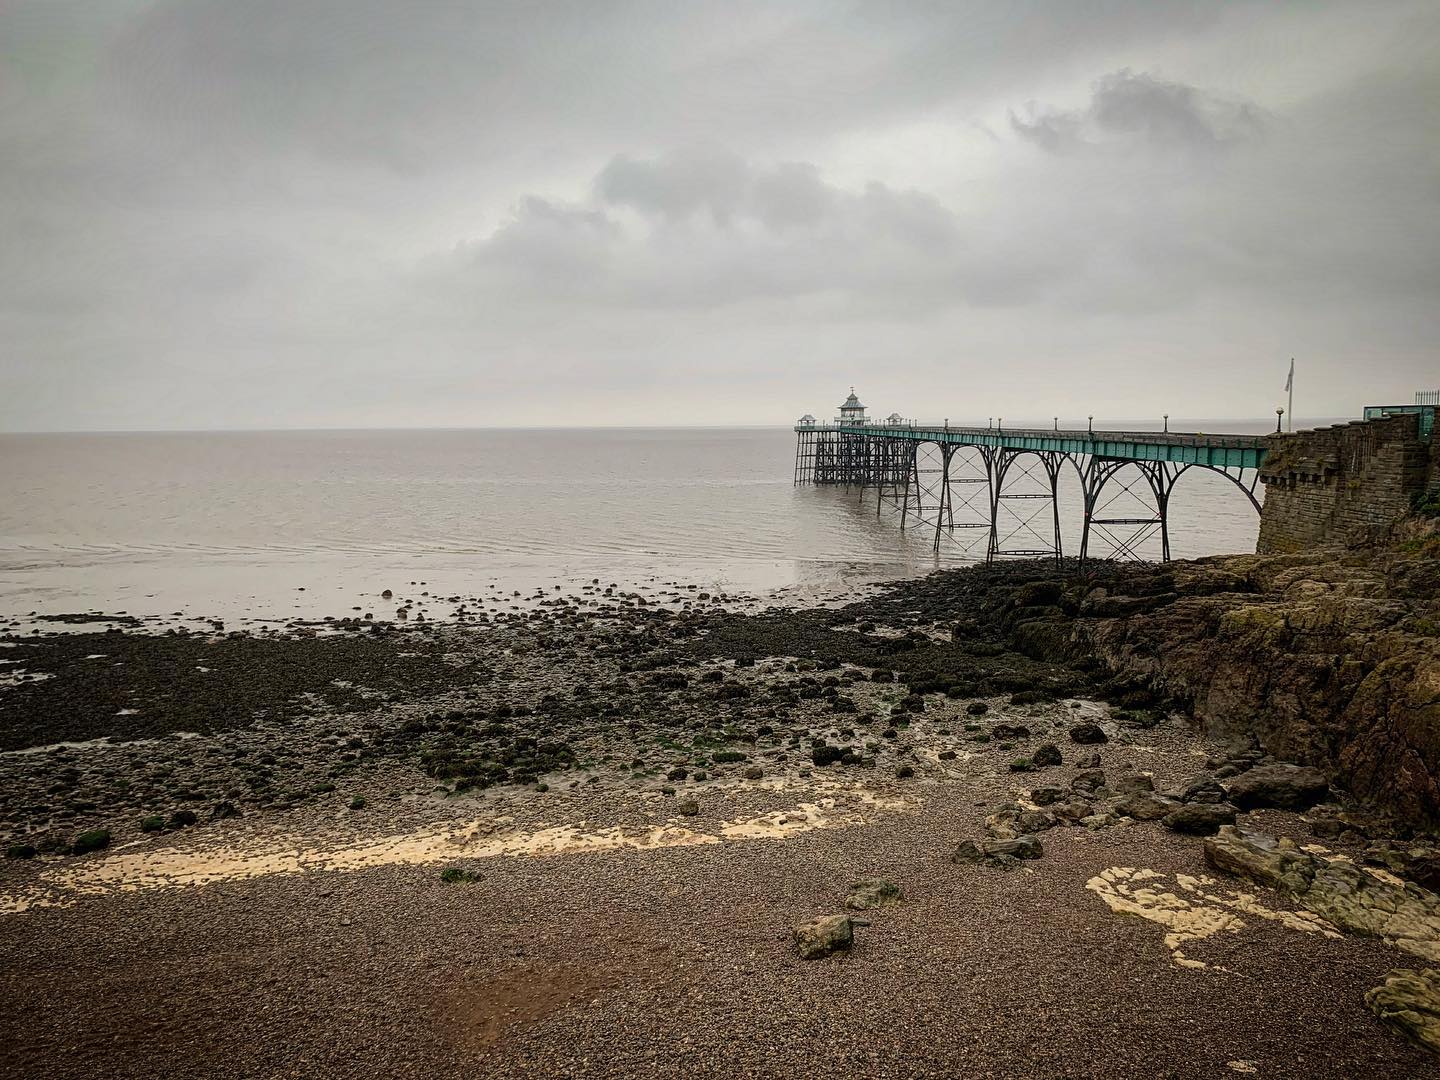 Beautiful Clevedon! we’ll be back on the first Sunday in Feb at Princes Hall in Clevedon for @clevedonsundaymarket February the 5th 10am-2pmYay!